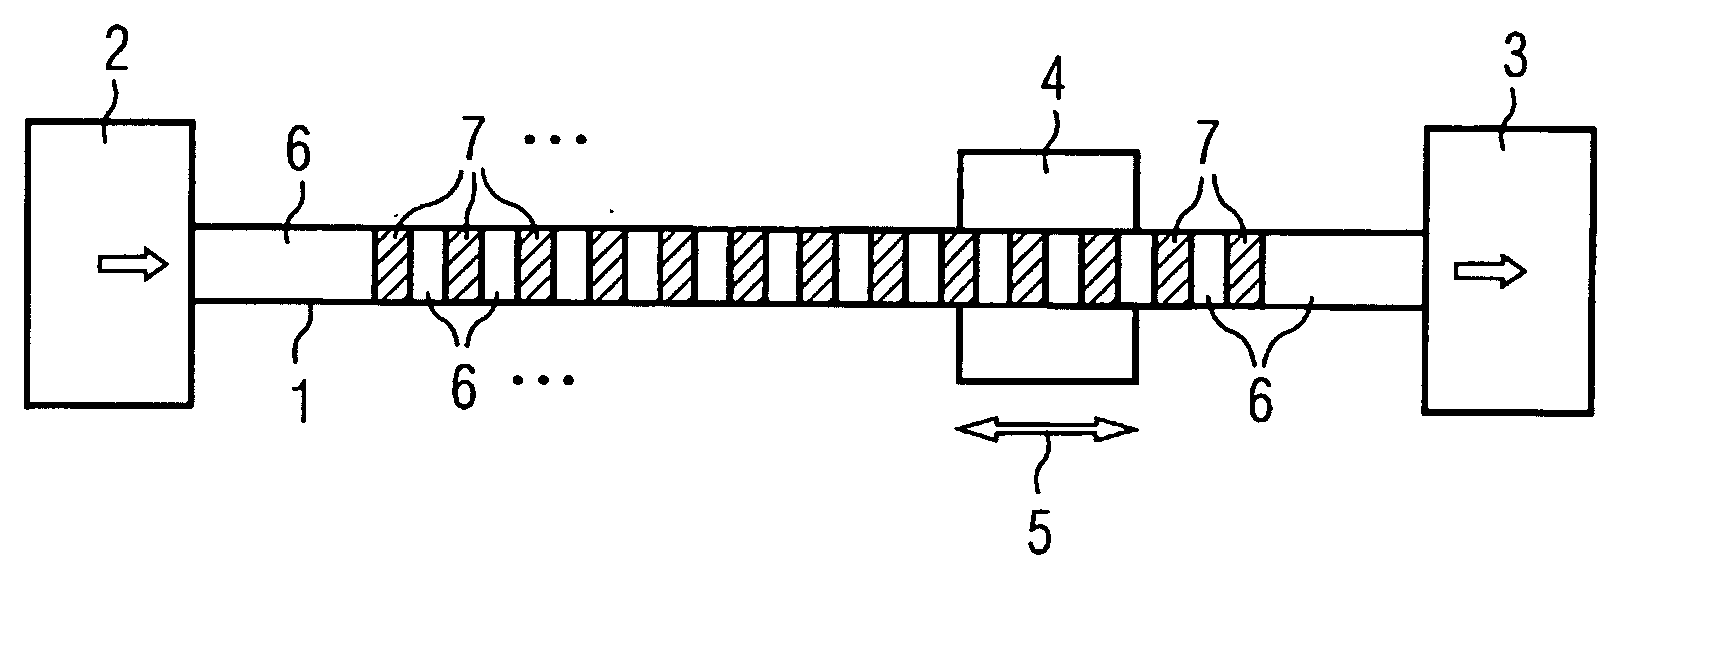 Device for optical signal transmission between two units movable relative to each other